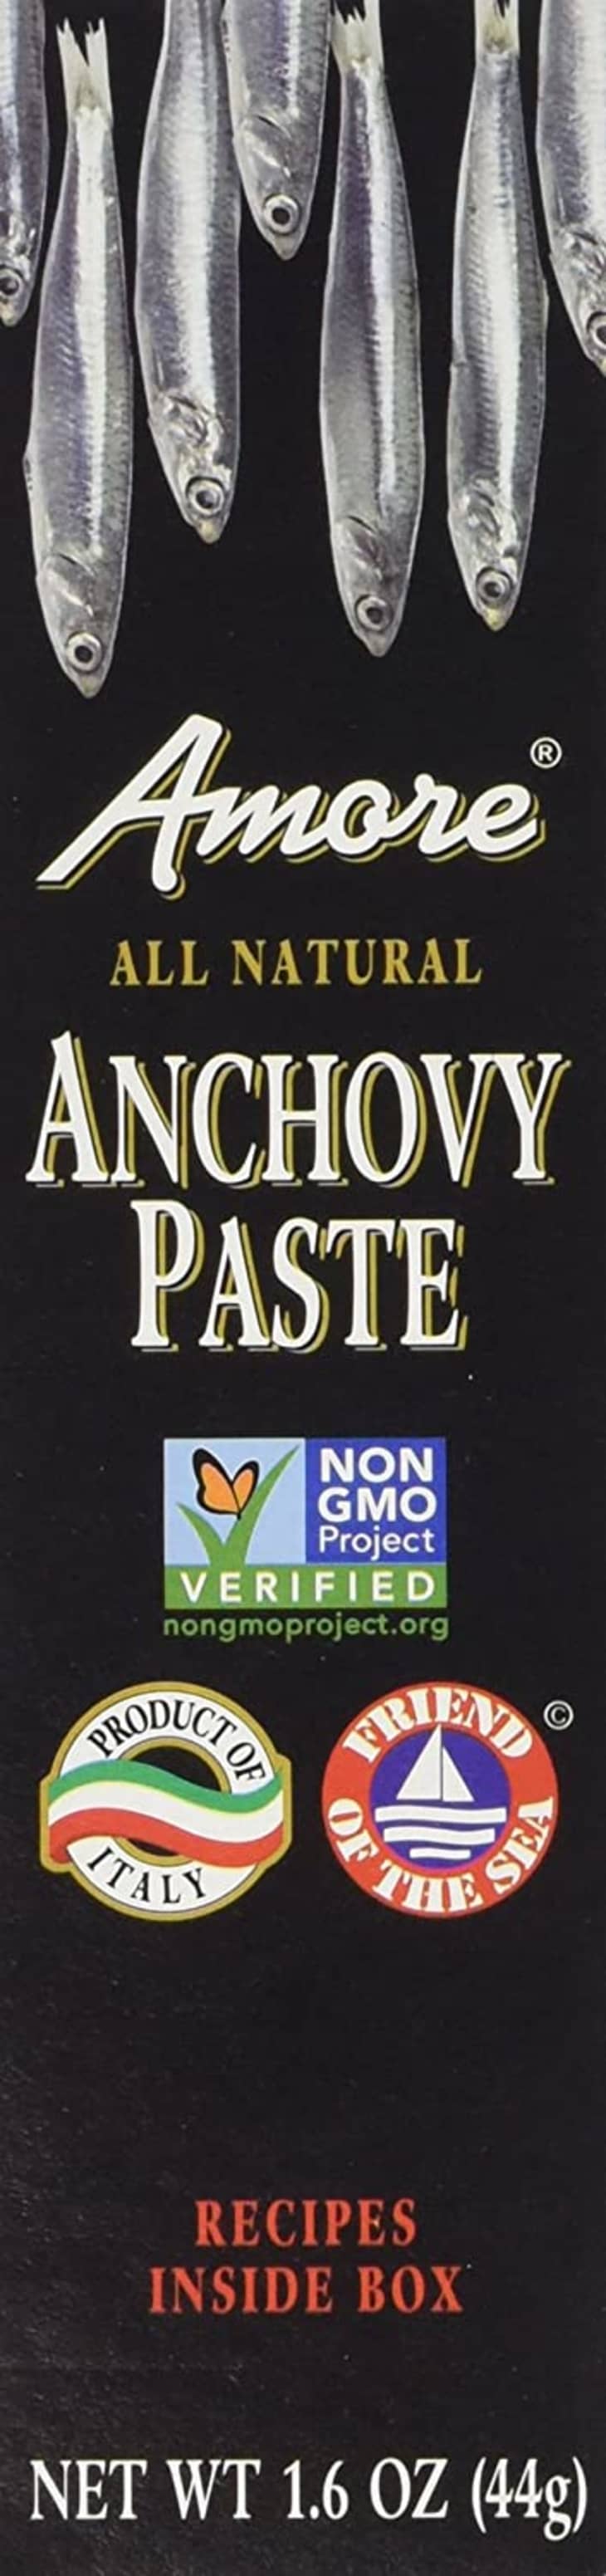 Amore Italian Anchovy Paste at Amazon